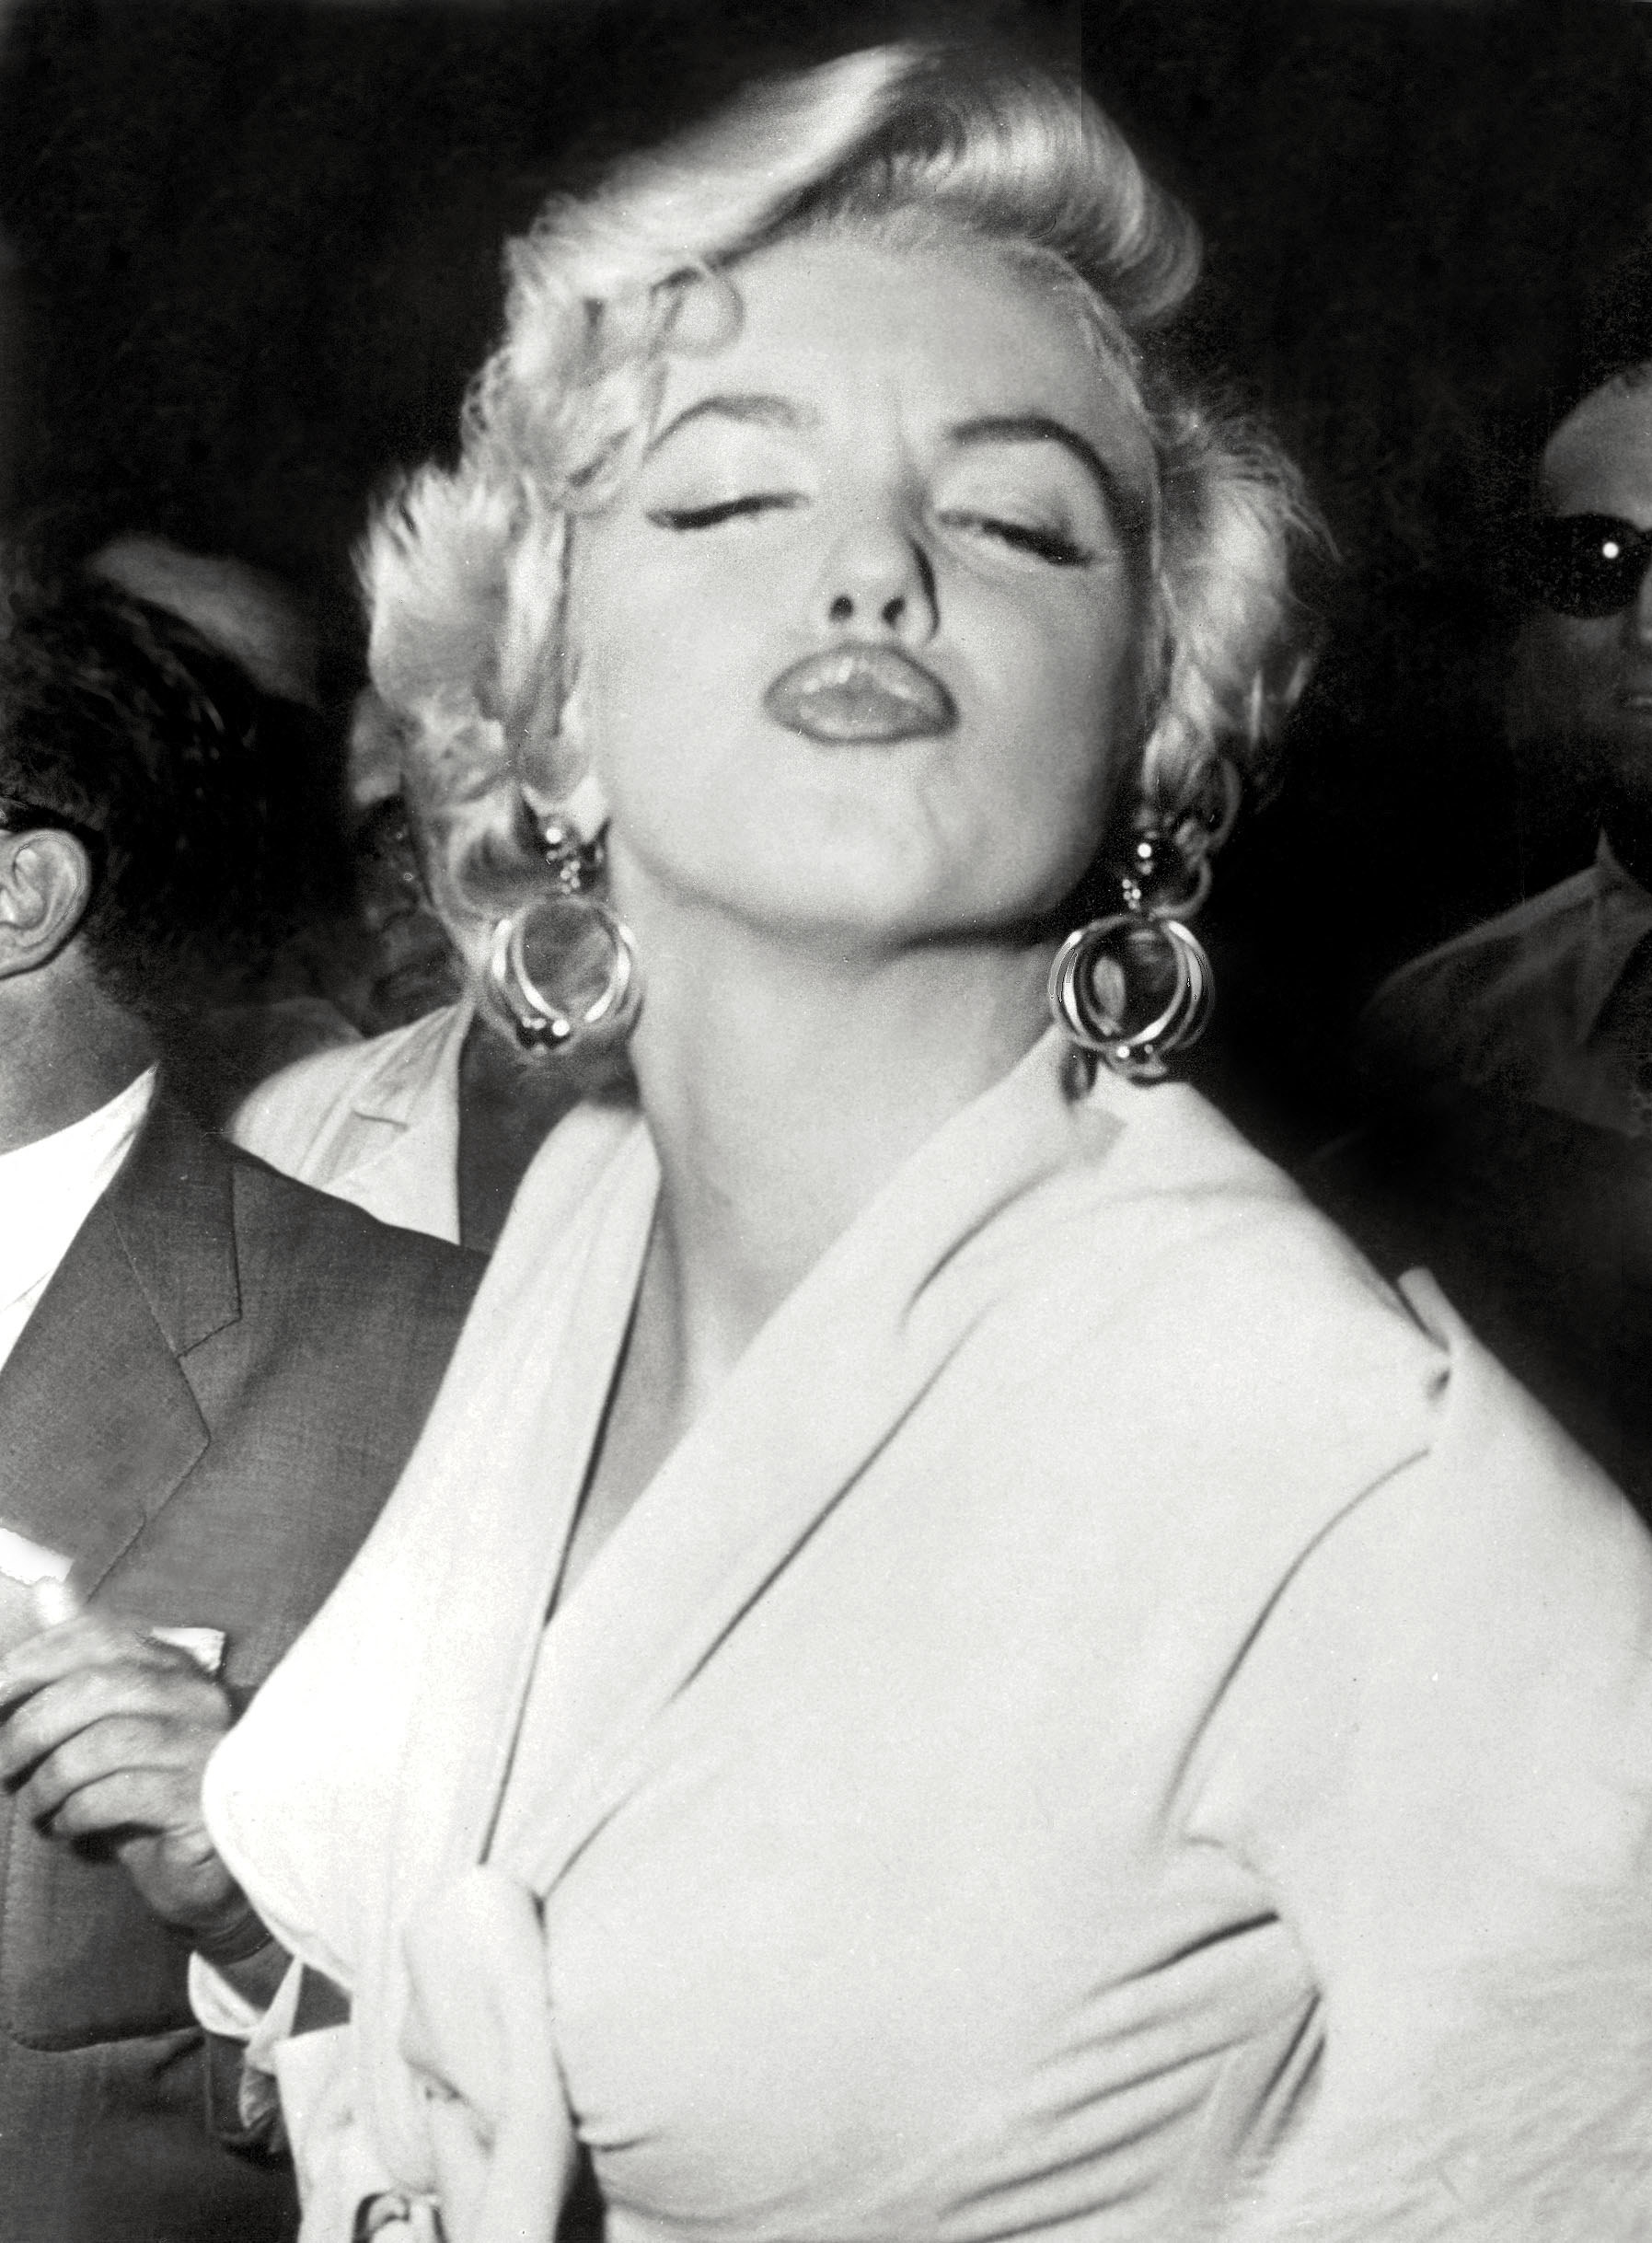 Marilyn Monroe poses in front of the photographers with her lips pucked